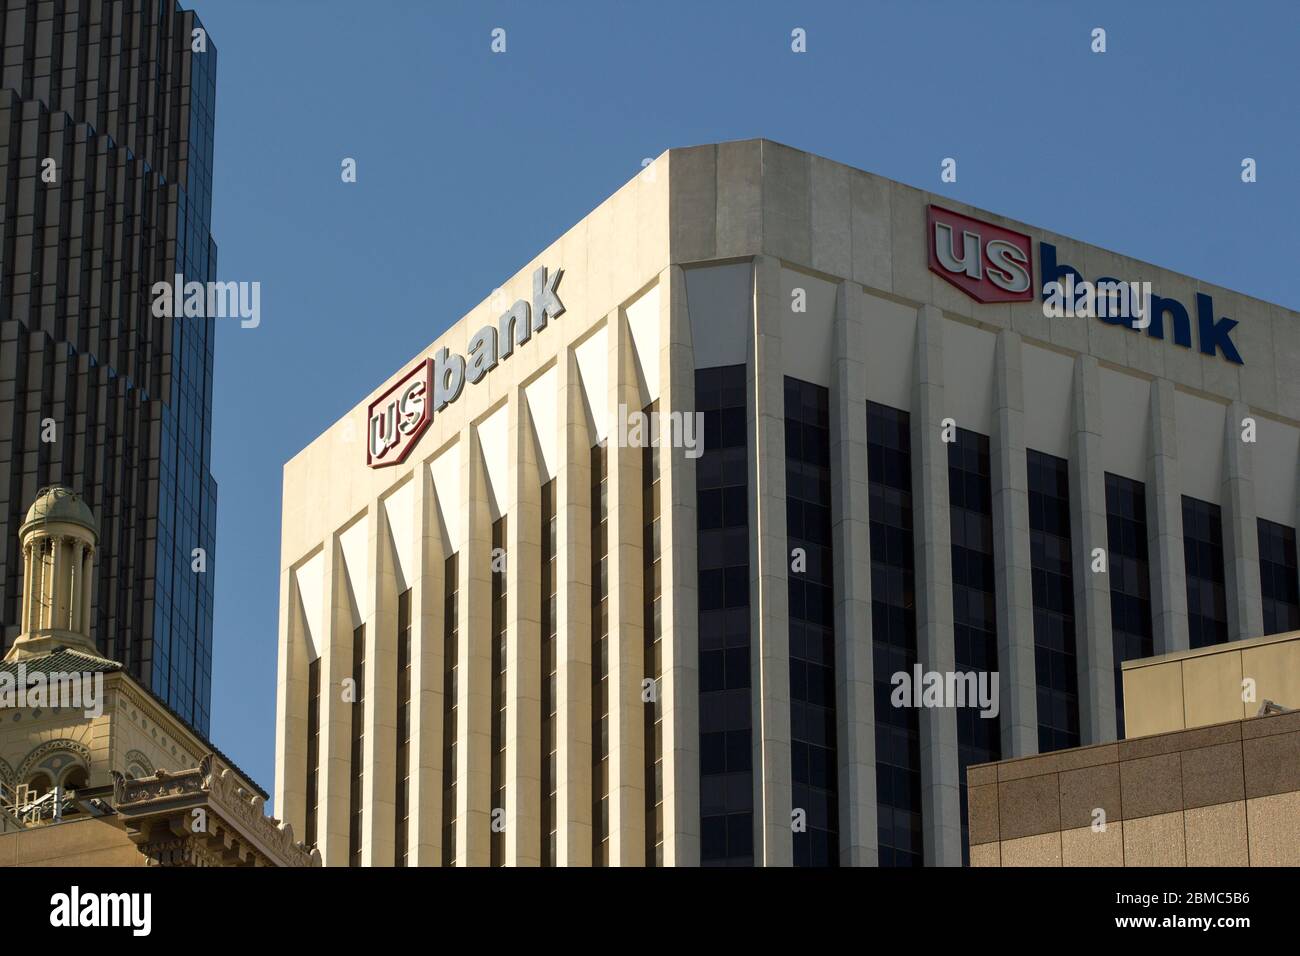 Close up of One California office skyscraper with US Bank logo, in the Financial District of San Francisco, California, seen on Feb 8, 2020. Stock Photo